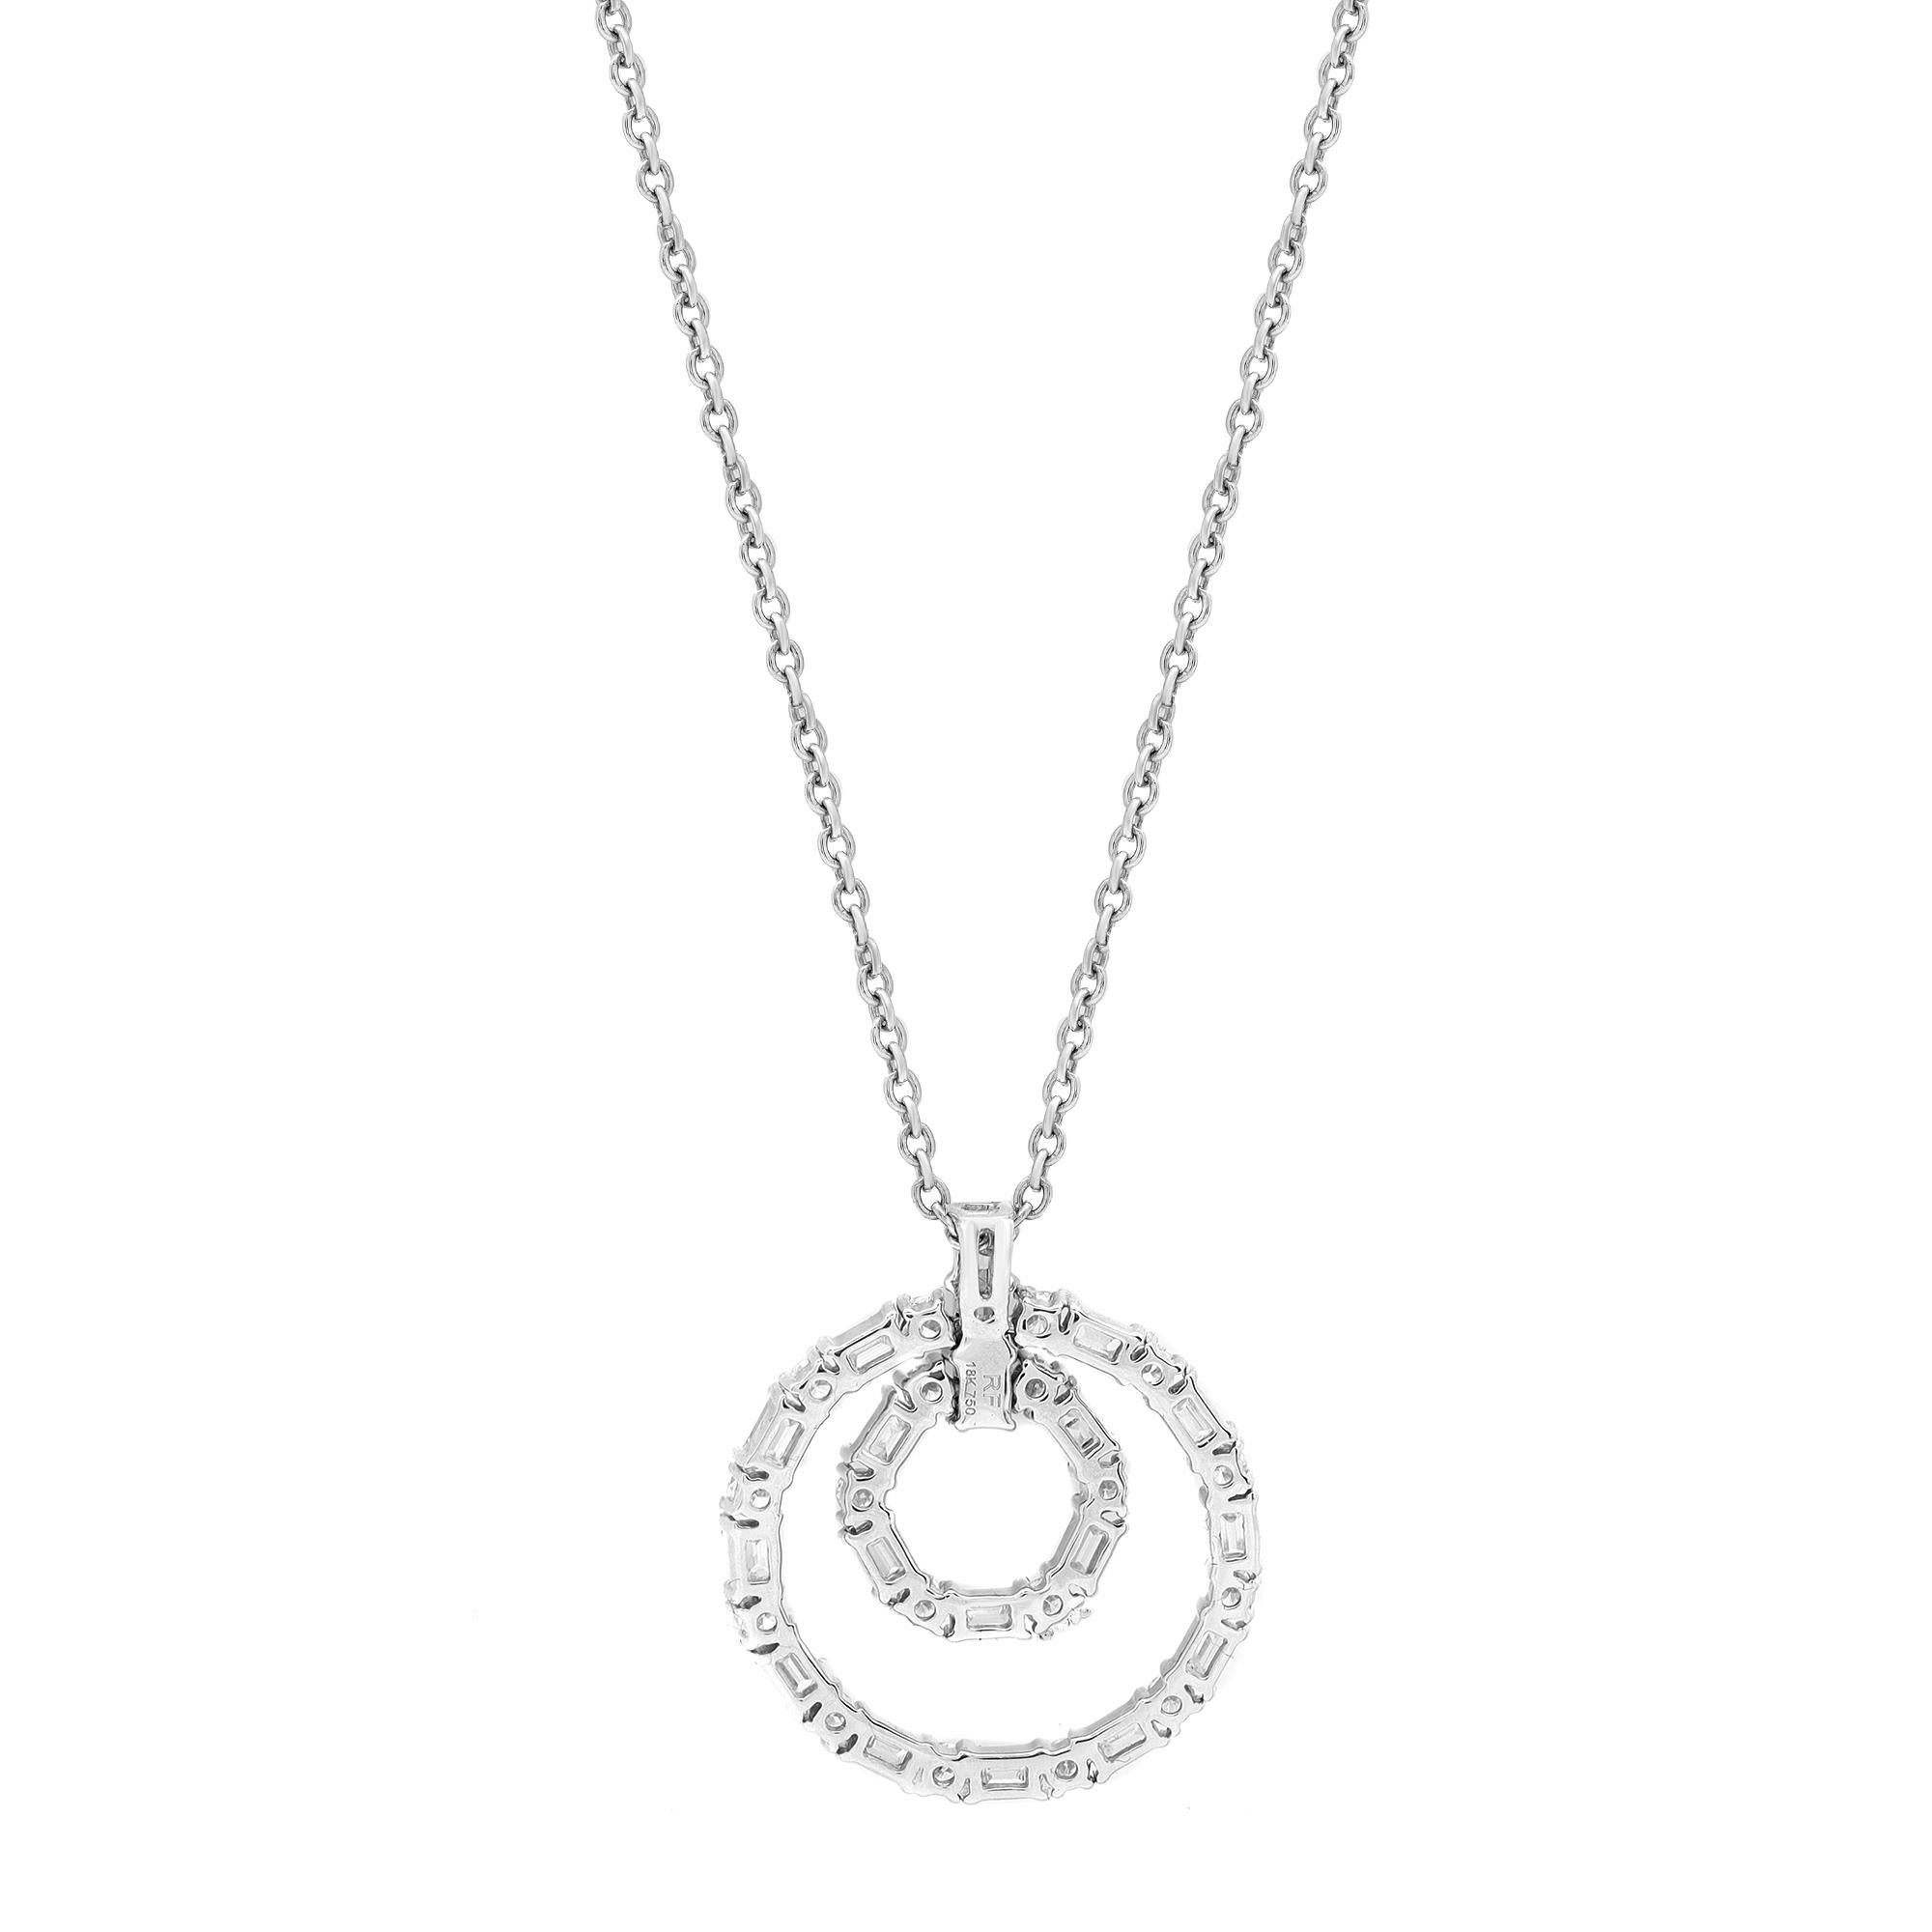 Fabulous and chic, this dazzling diamond double ring pendant necklace is a standout addition to your everyday and evening looks. This piece gives a touch of elegance to any ensemble you pair it with. Features 37 prong set Baguette and Round cut